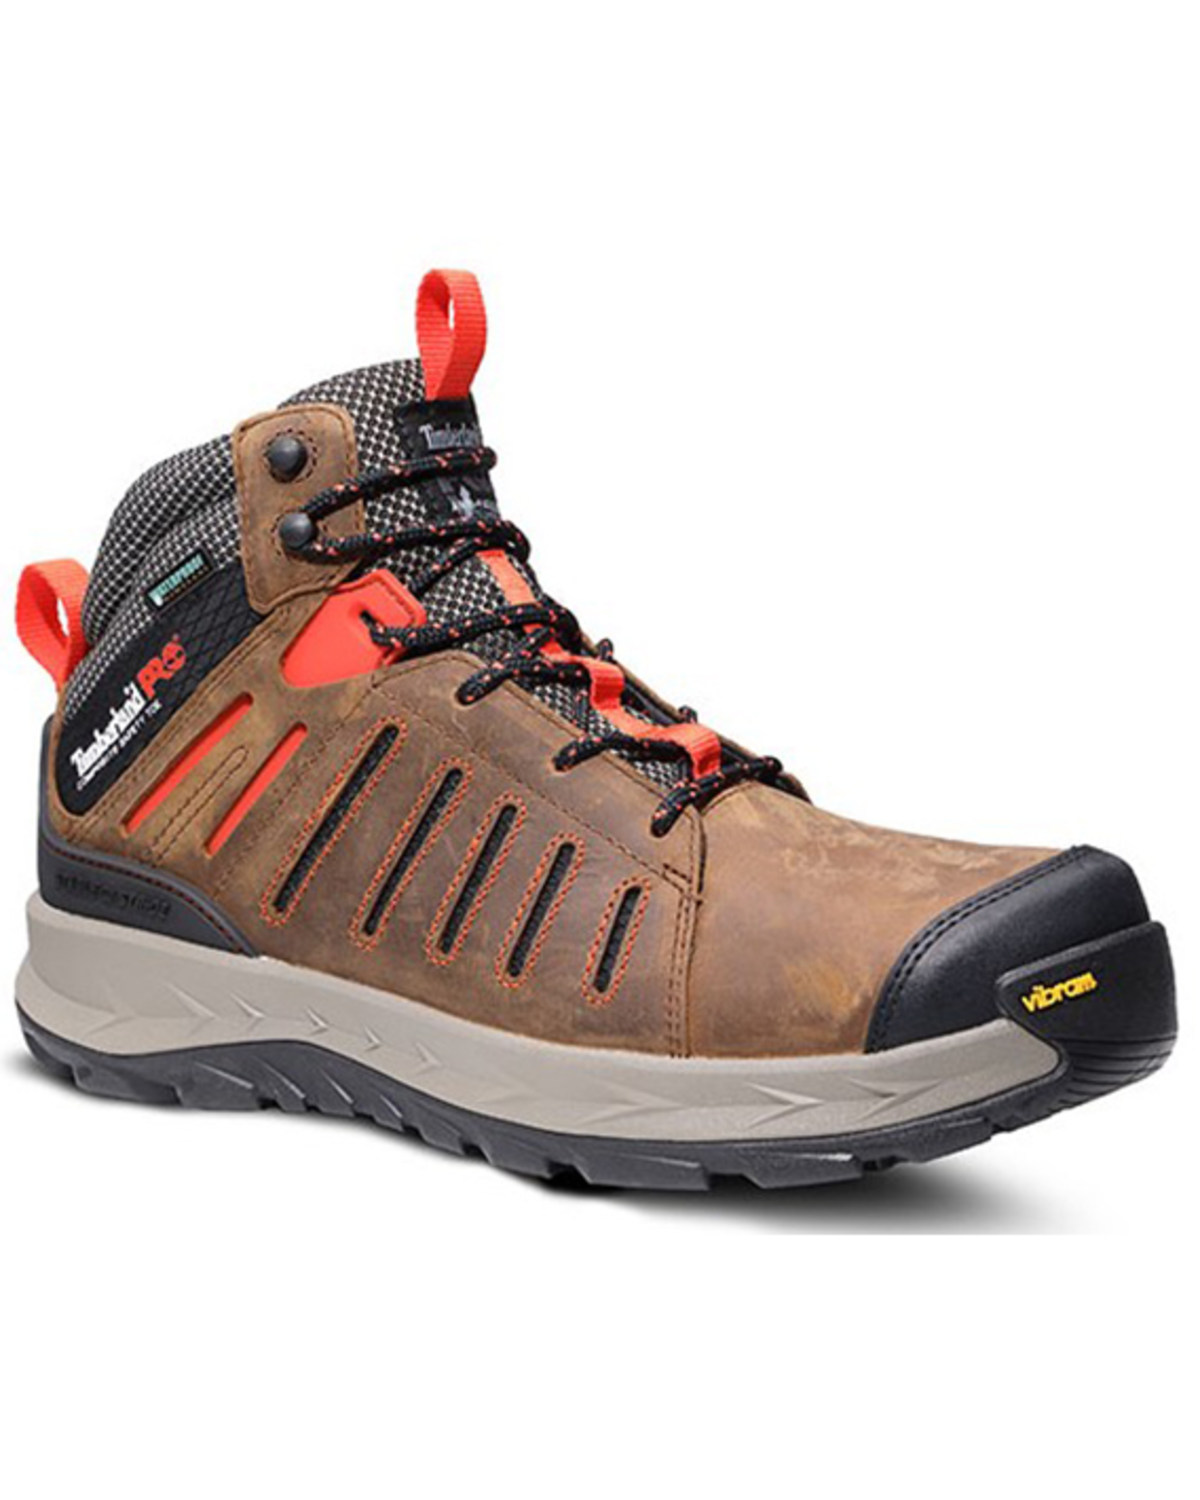 Timberland Men's Trailwind Waterproof Lace-Up Work Boots - Composite Toe